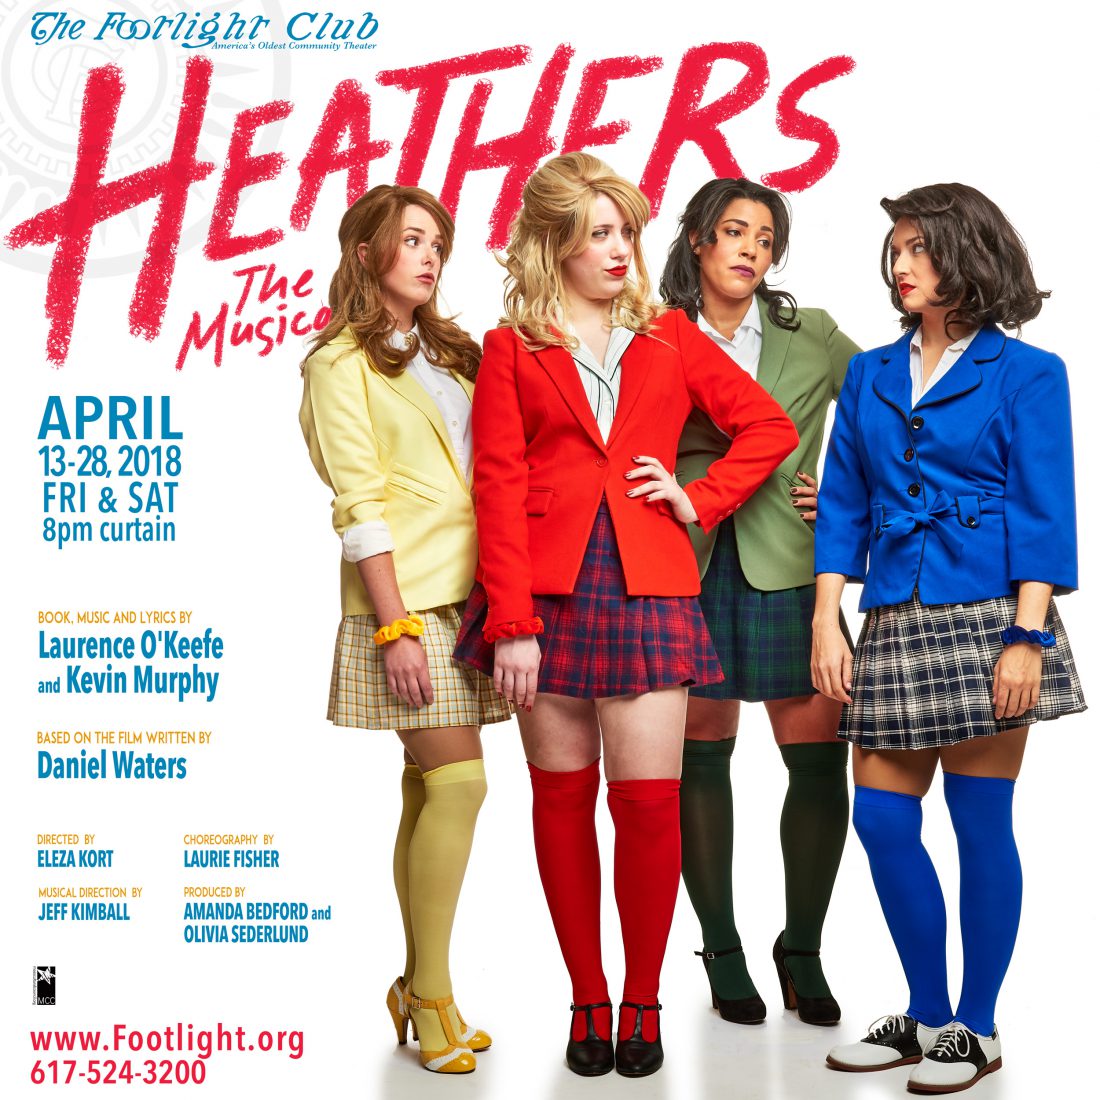 Heathers, The Musical at The Footlight Club